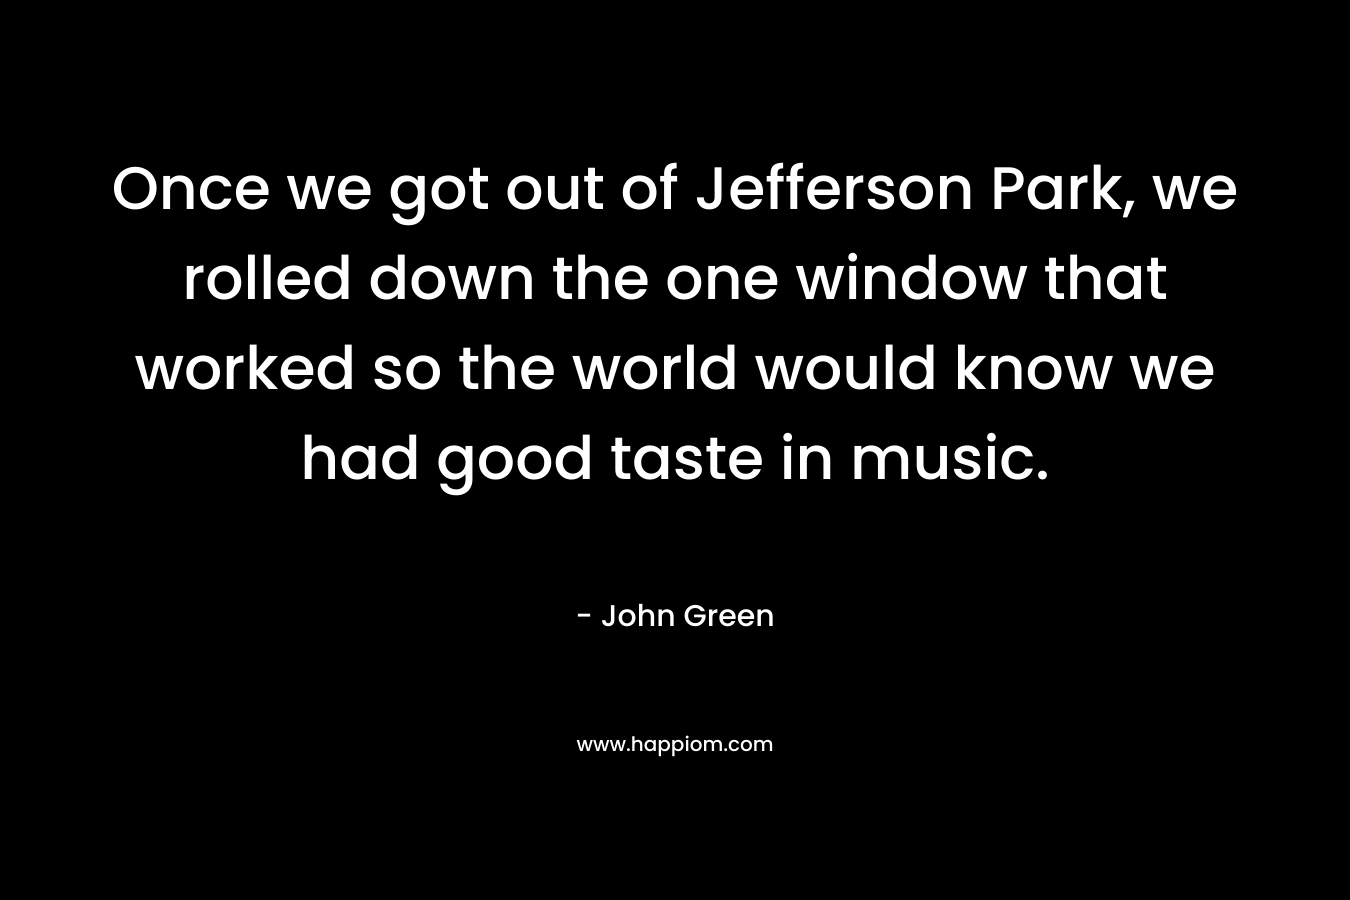 Once we got out of Jefferson Park, we rolled down the one window that worked so the world would know we had good taste in music. – John Green